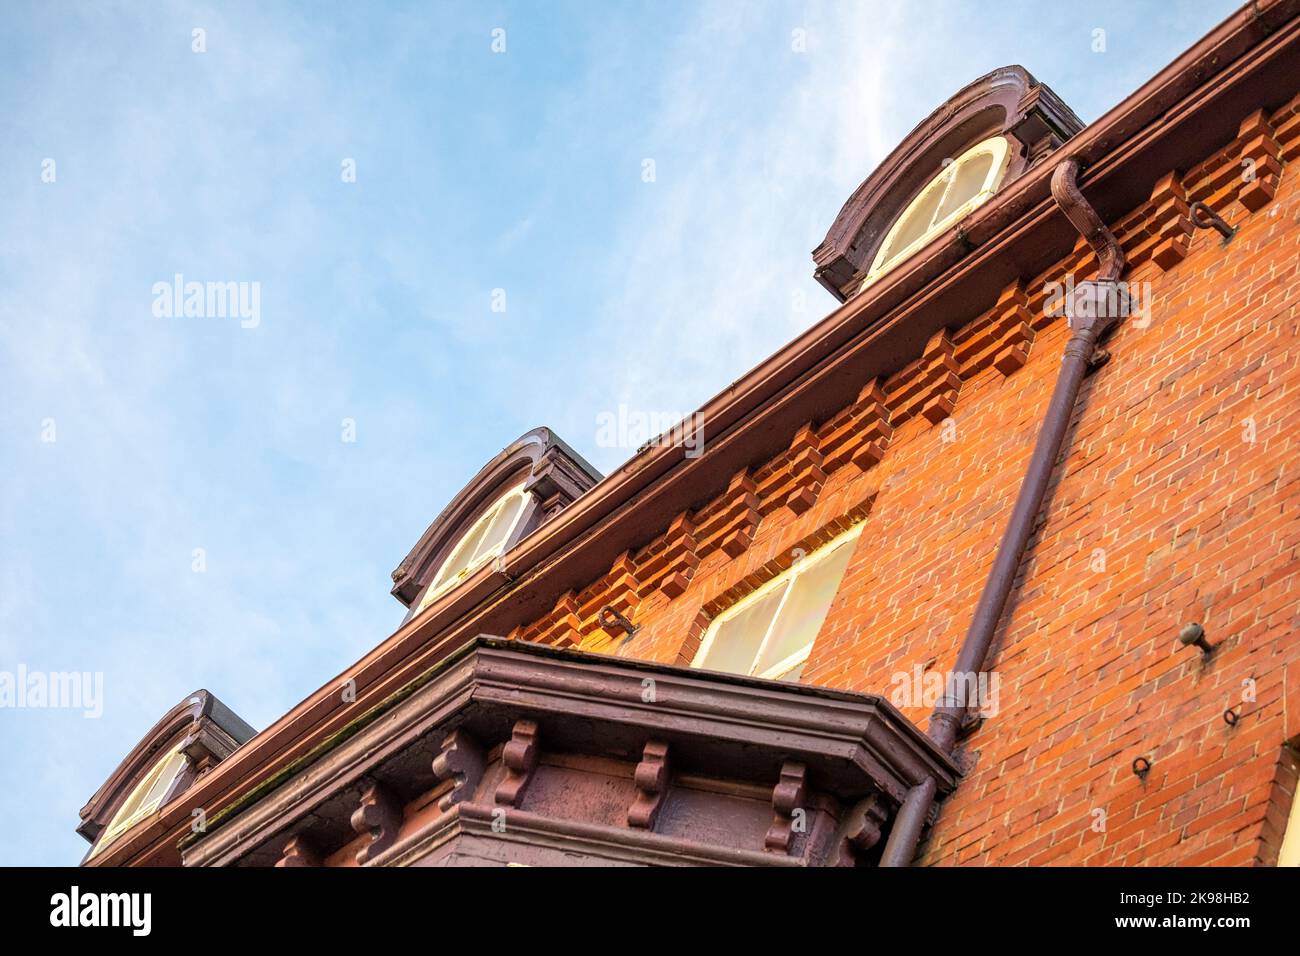 An upward view of a historic residential building with red brick, yellow and green wooden decorative style wood trim and glass single hung windows Stock Photo